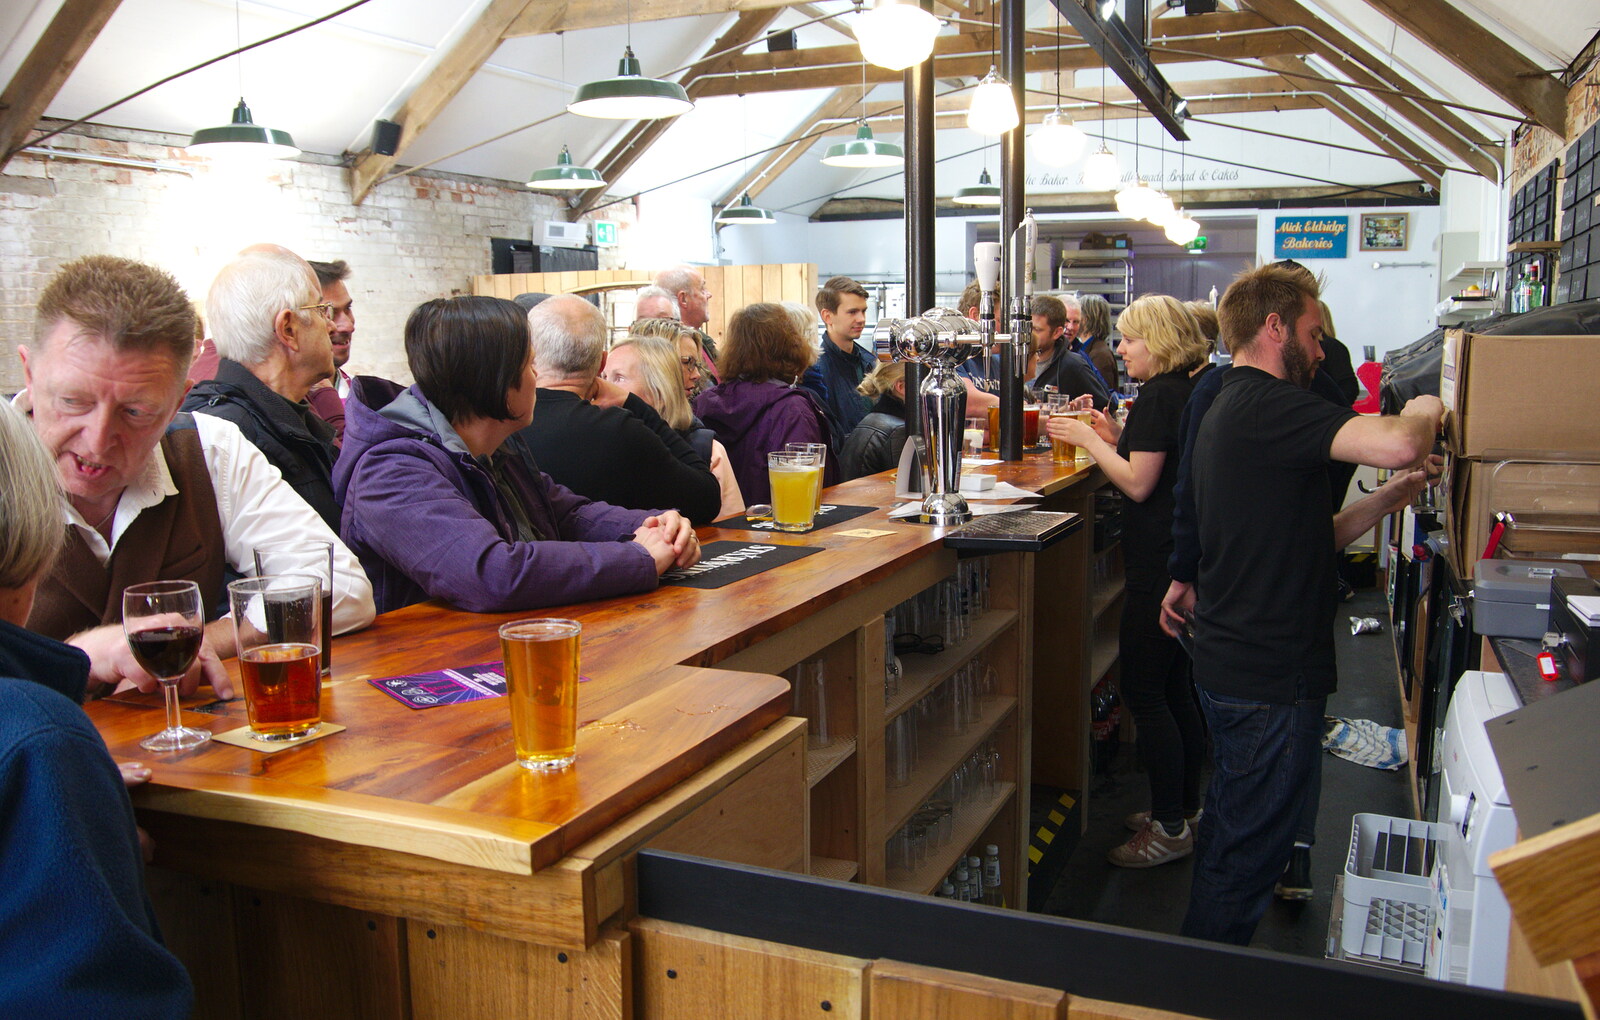 At the bar from The Opening of Star Wing Brewery's Tap Room, Redgrave, Suffolk - 4th May 2019